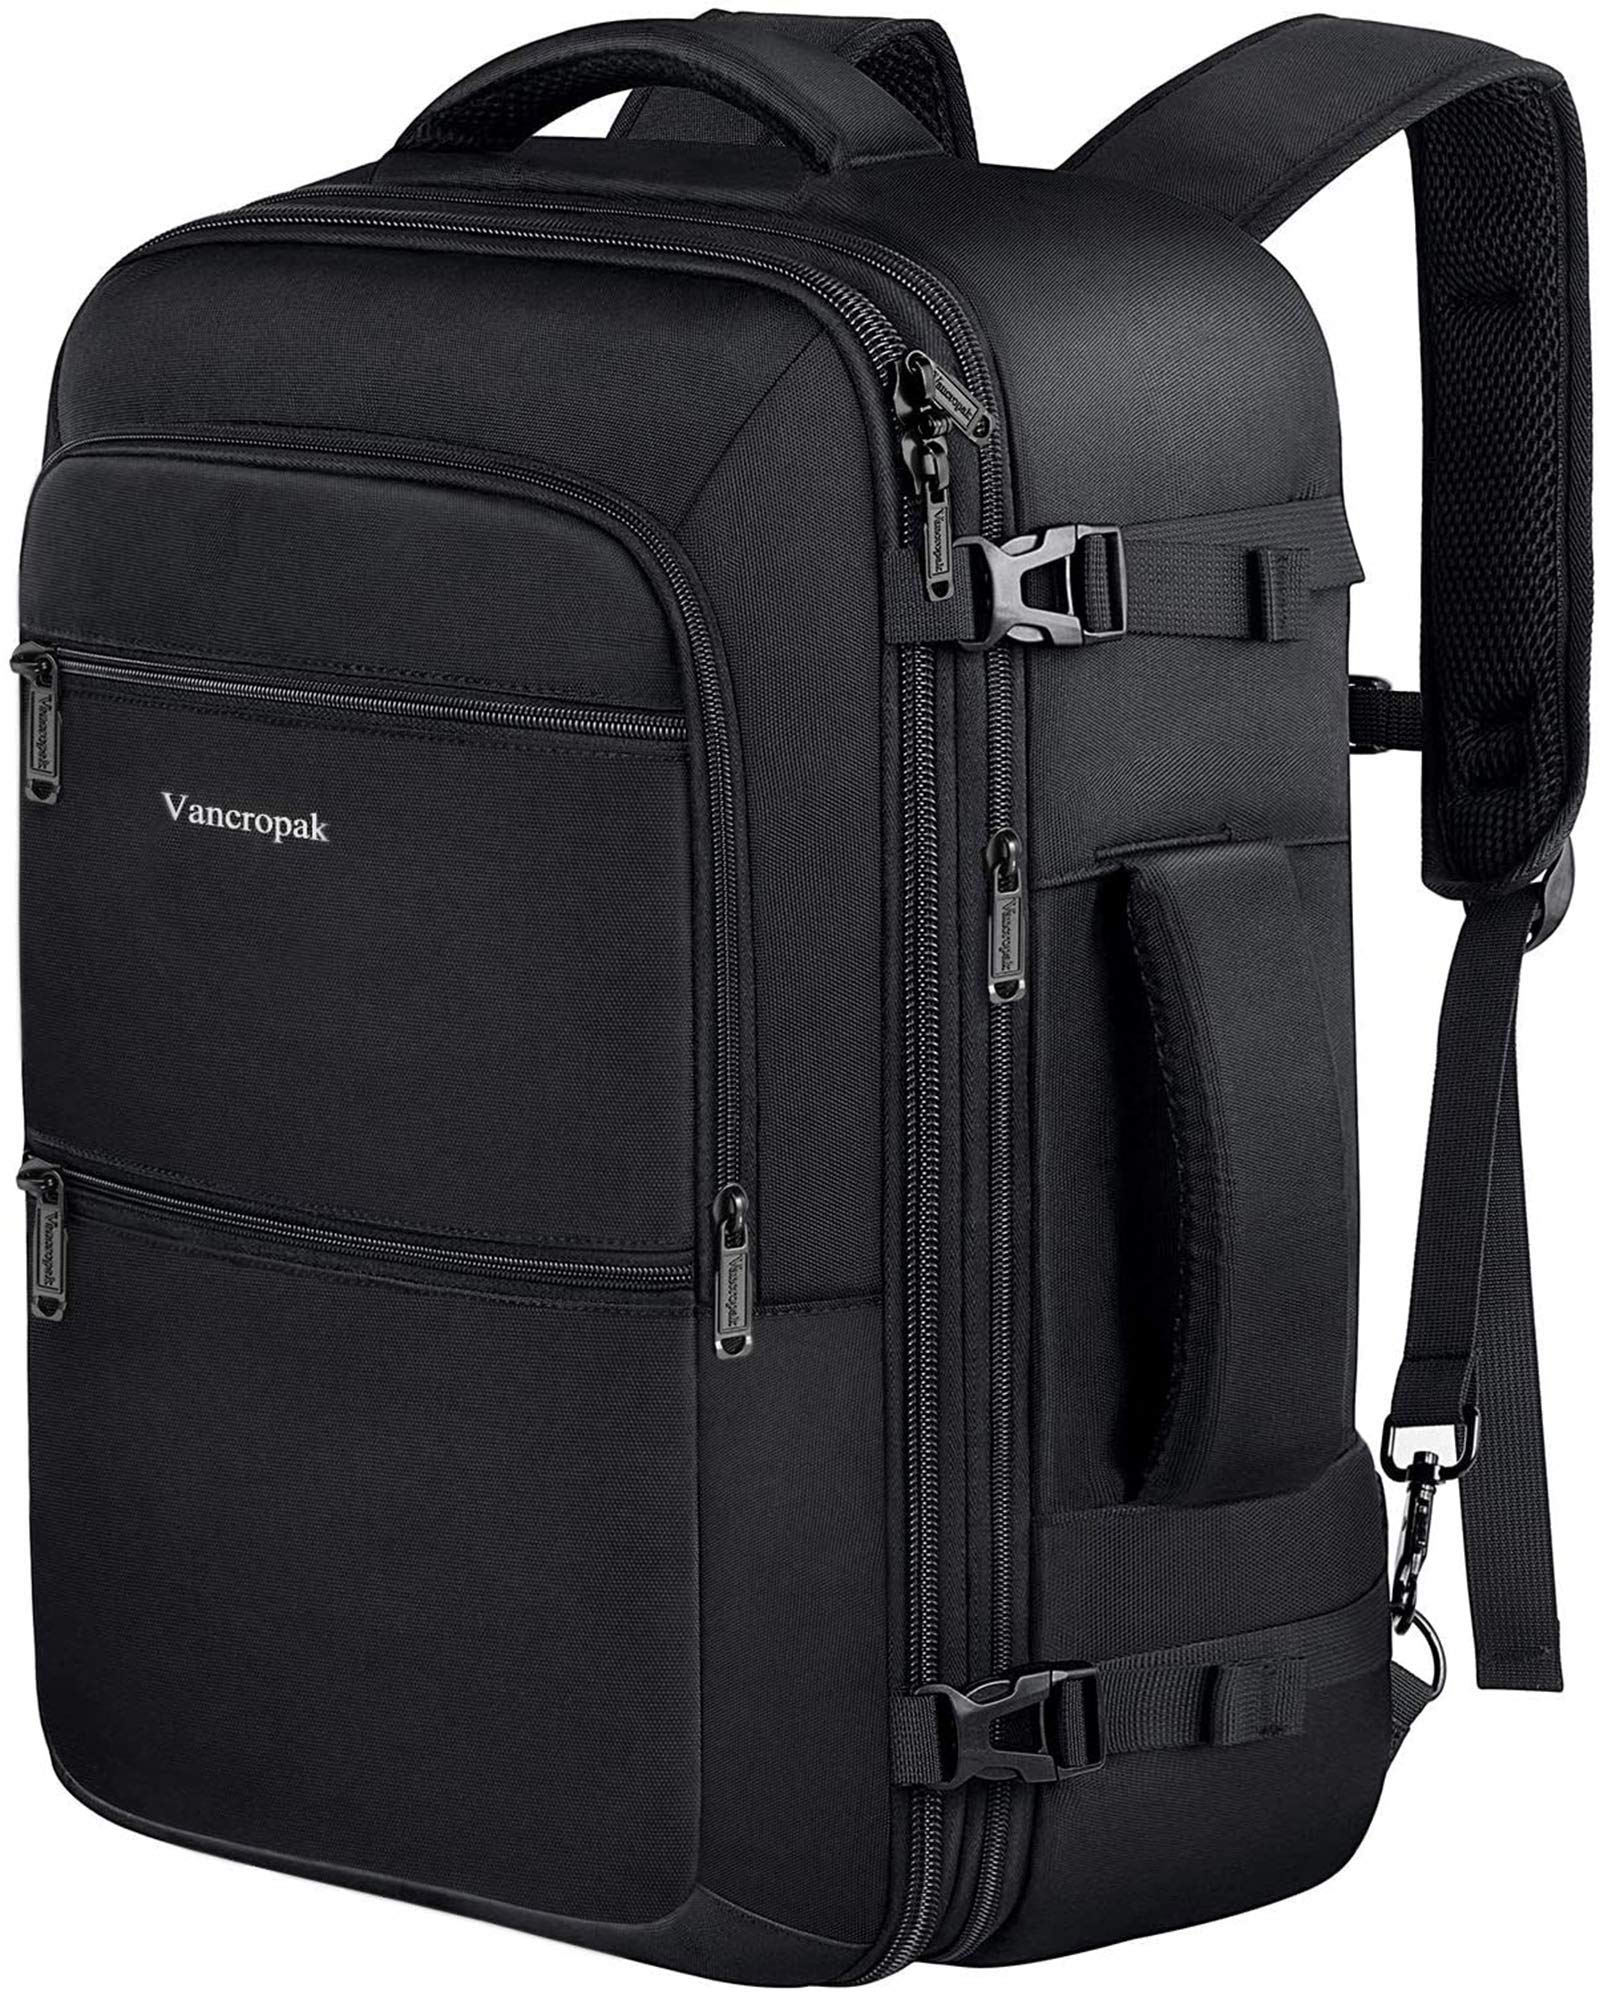 Vancropak Travel Backpack, 40L Expandable Carry On Backpack, Water Resistant, Expandable,Black - $27.19